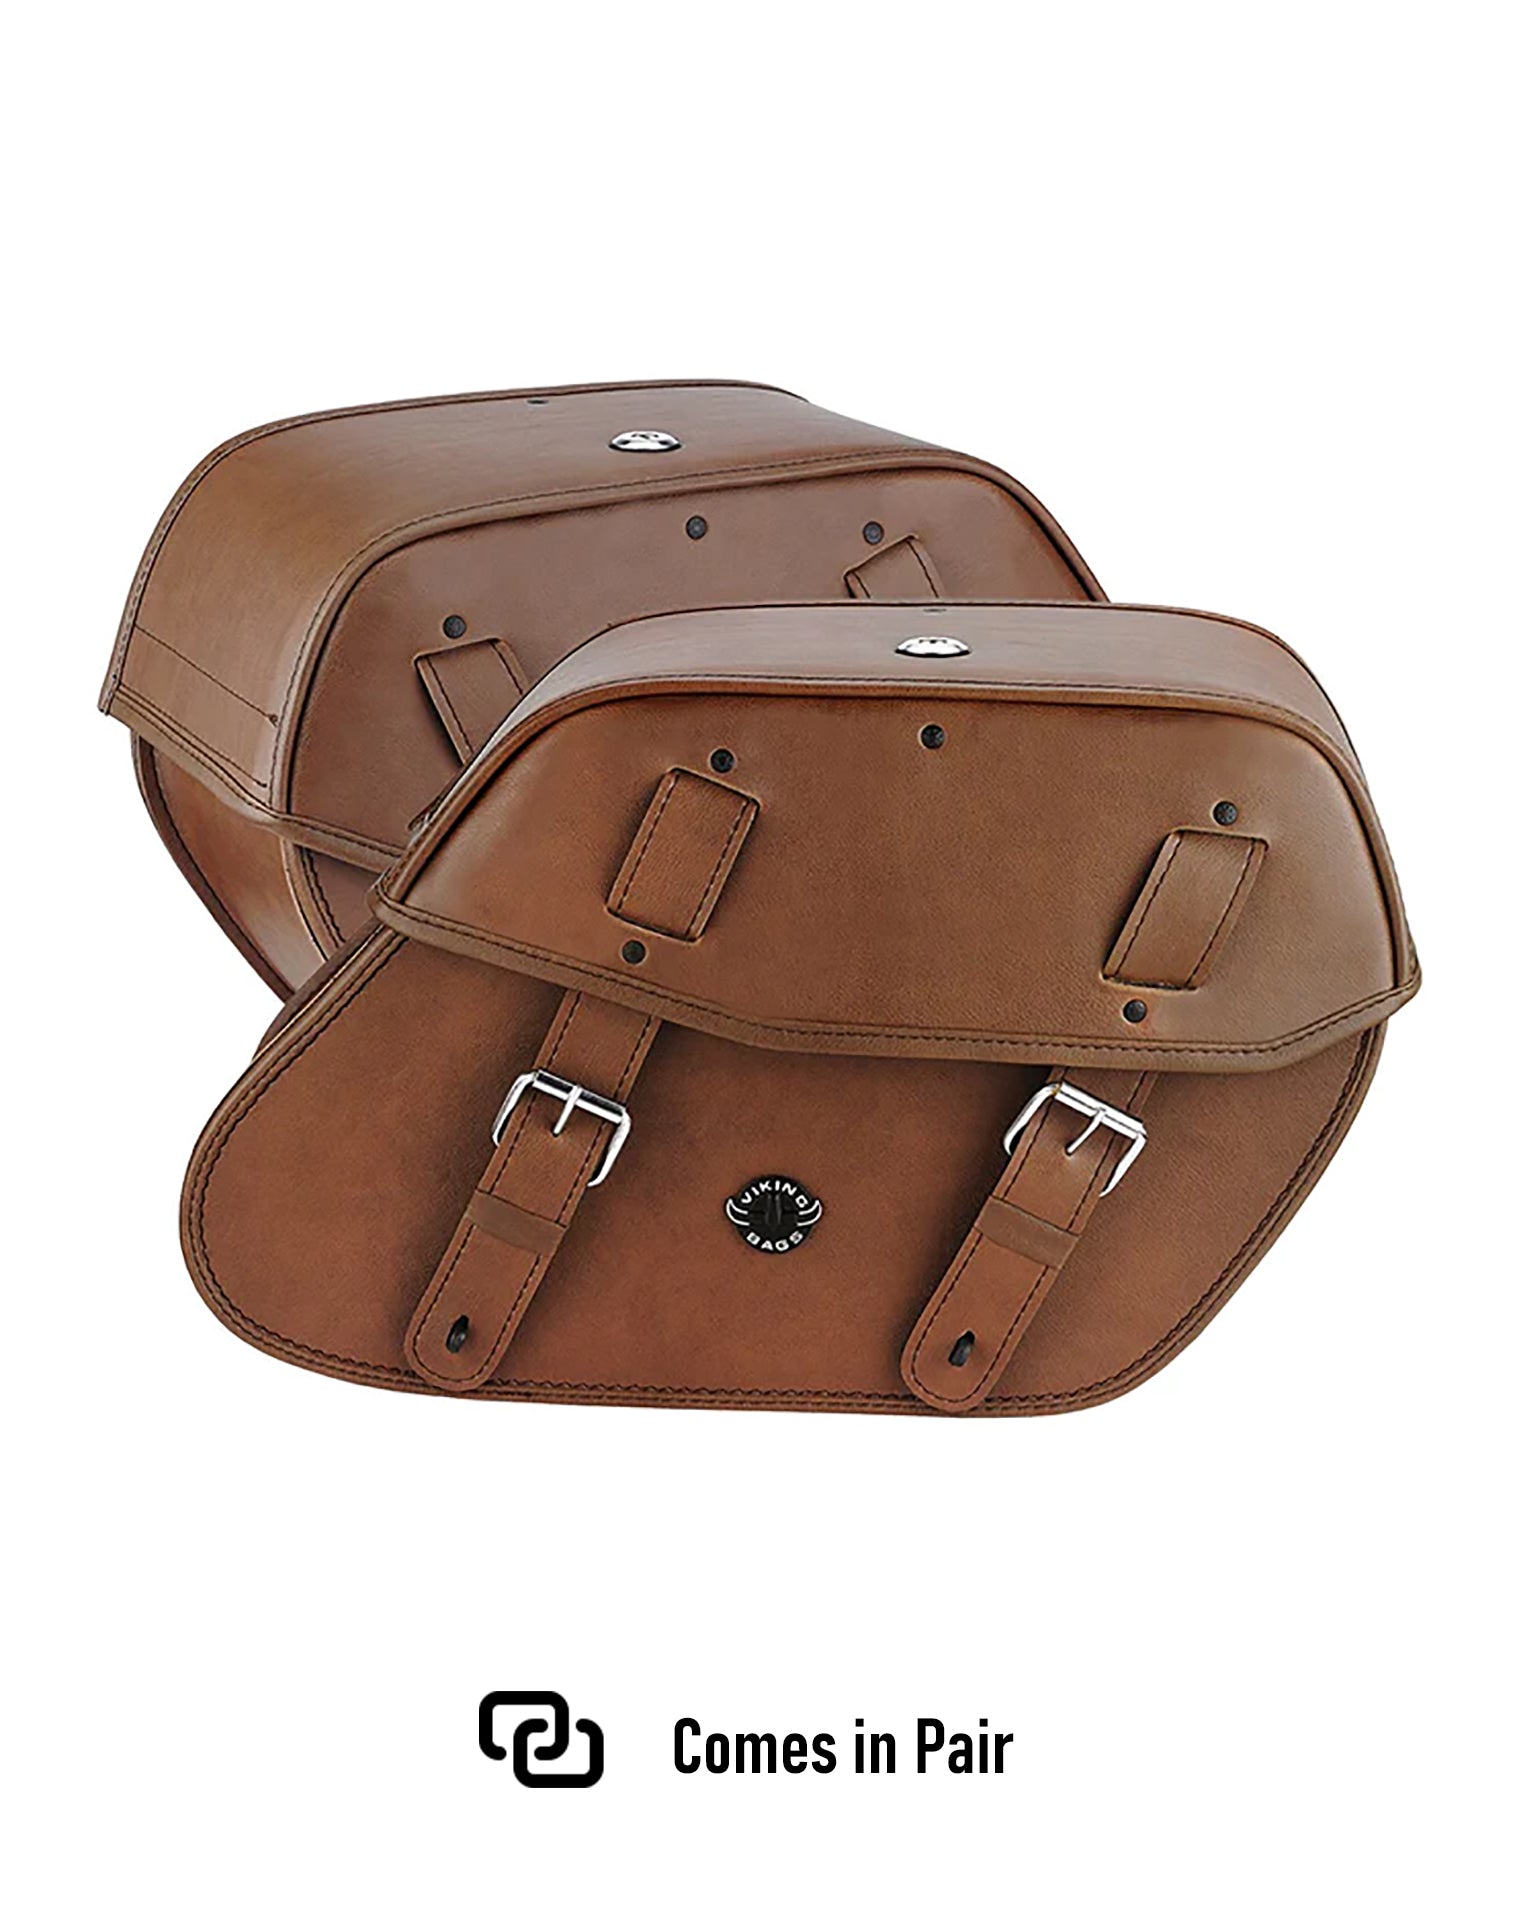 Viking Odin Brown Large Honda Vtx 1800 S Leather Motorcycle Saddlebags Weather Resistant Bags Comes in Pair